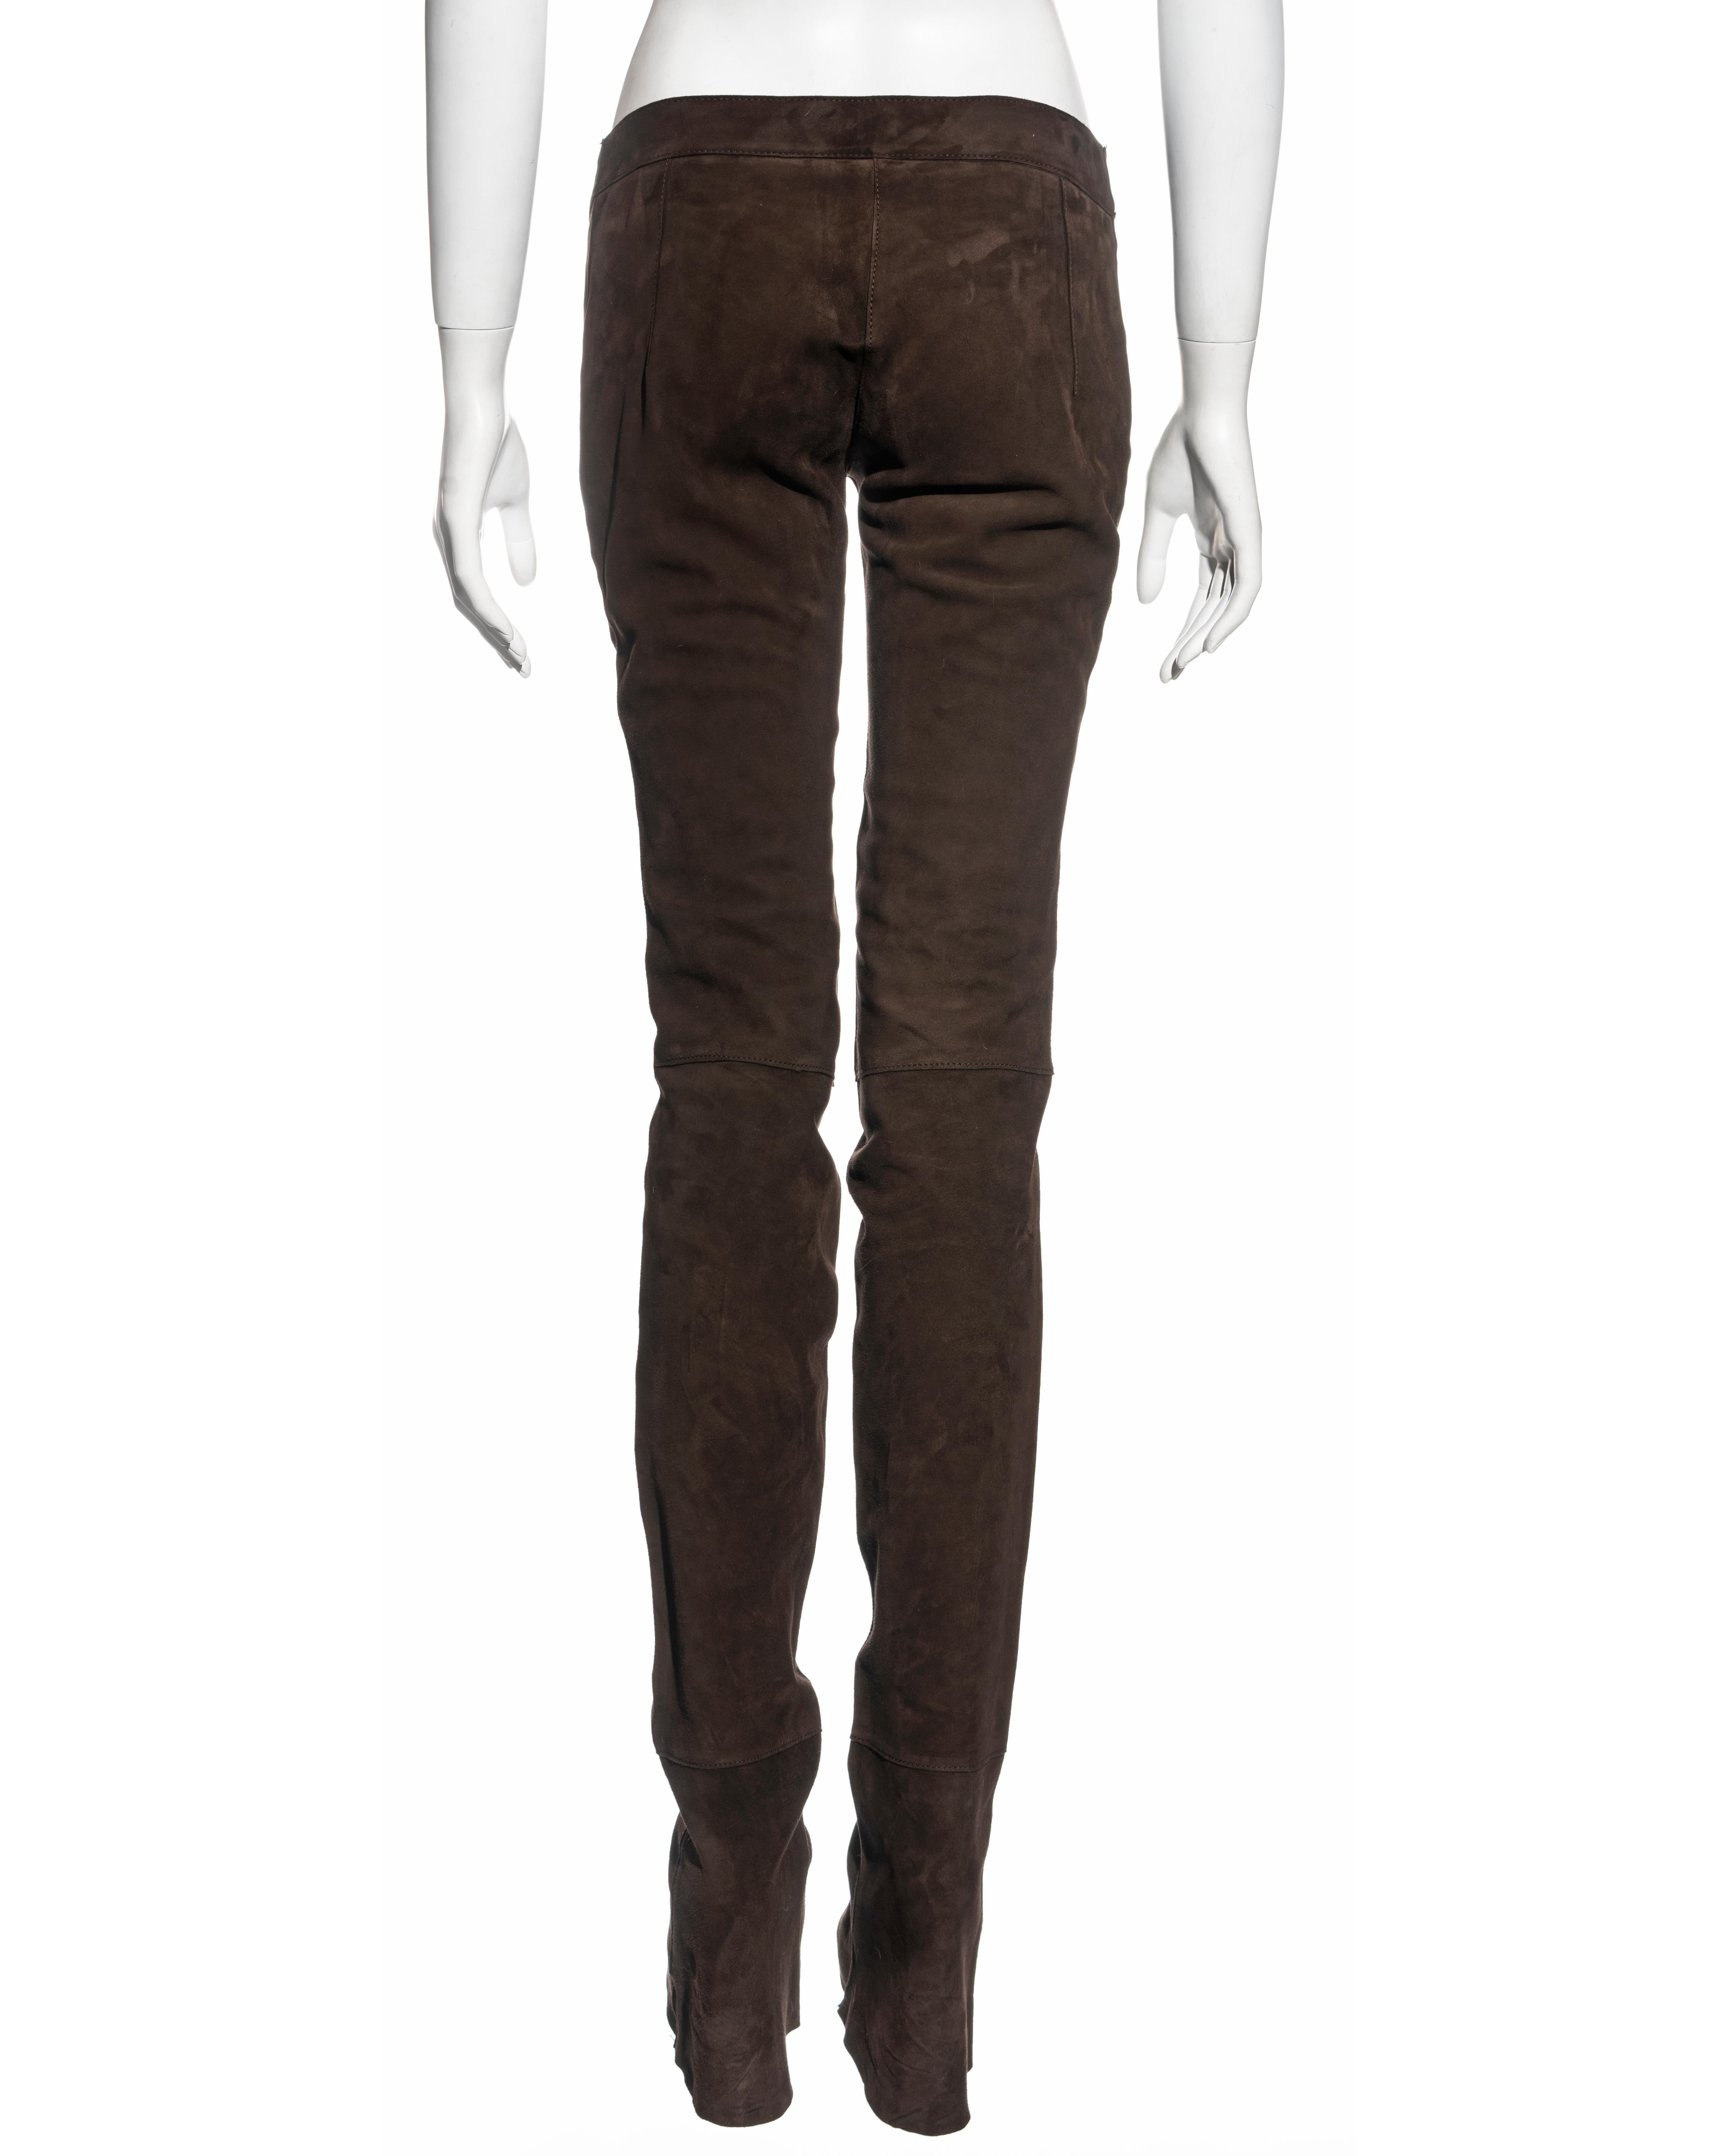 Dolce & Gabbana low rise extra long ruched brown leather pants, fw 2001 3